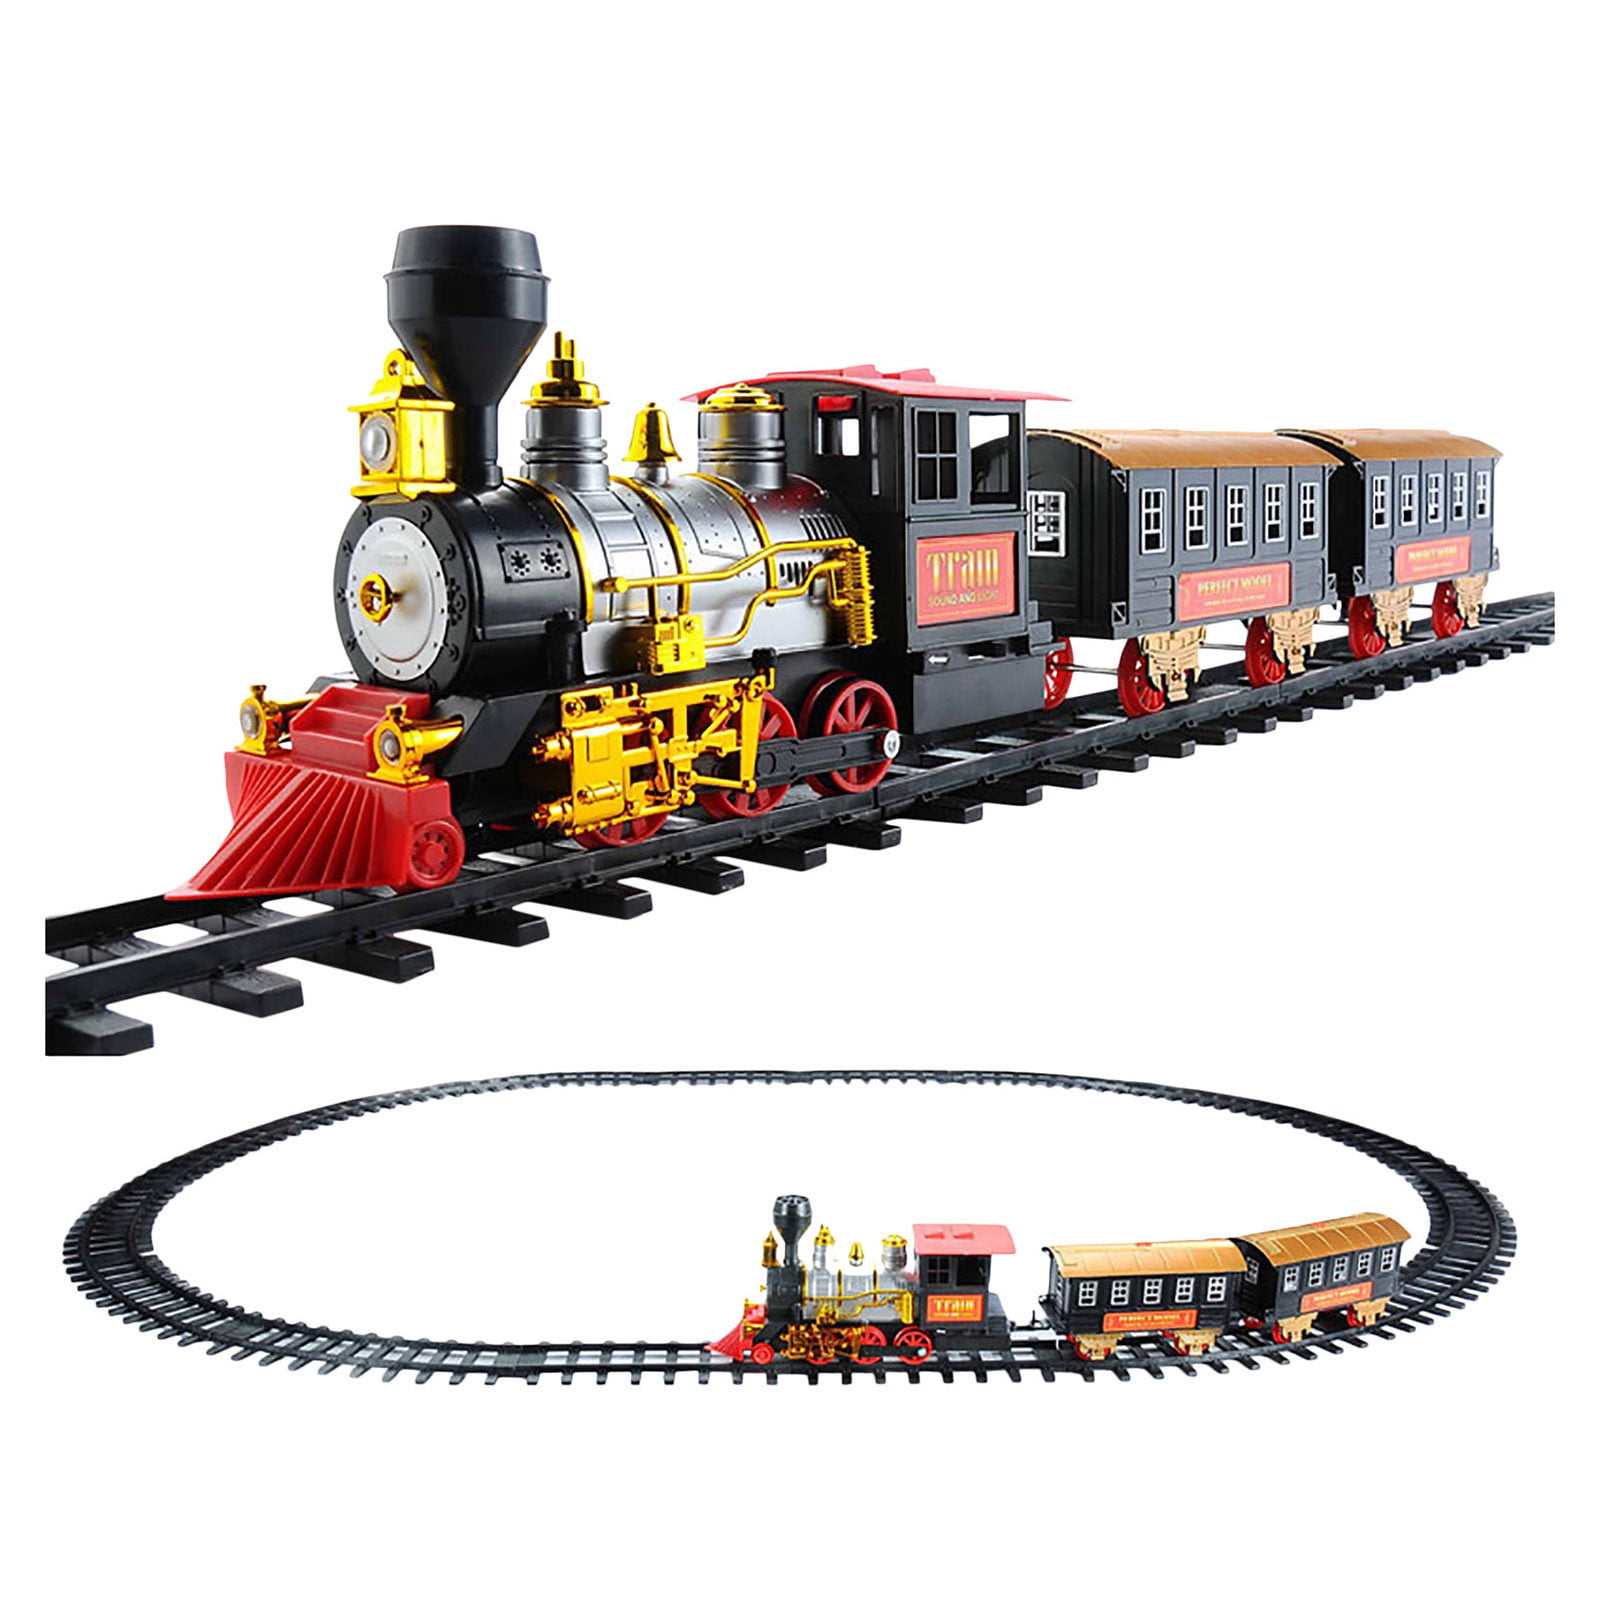 Details about   Original Thomas and Friends Donald Plastic Electric Train Set With Free Shipping 